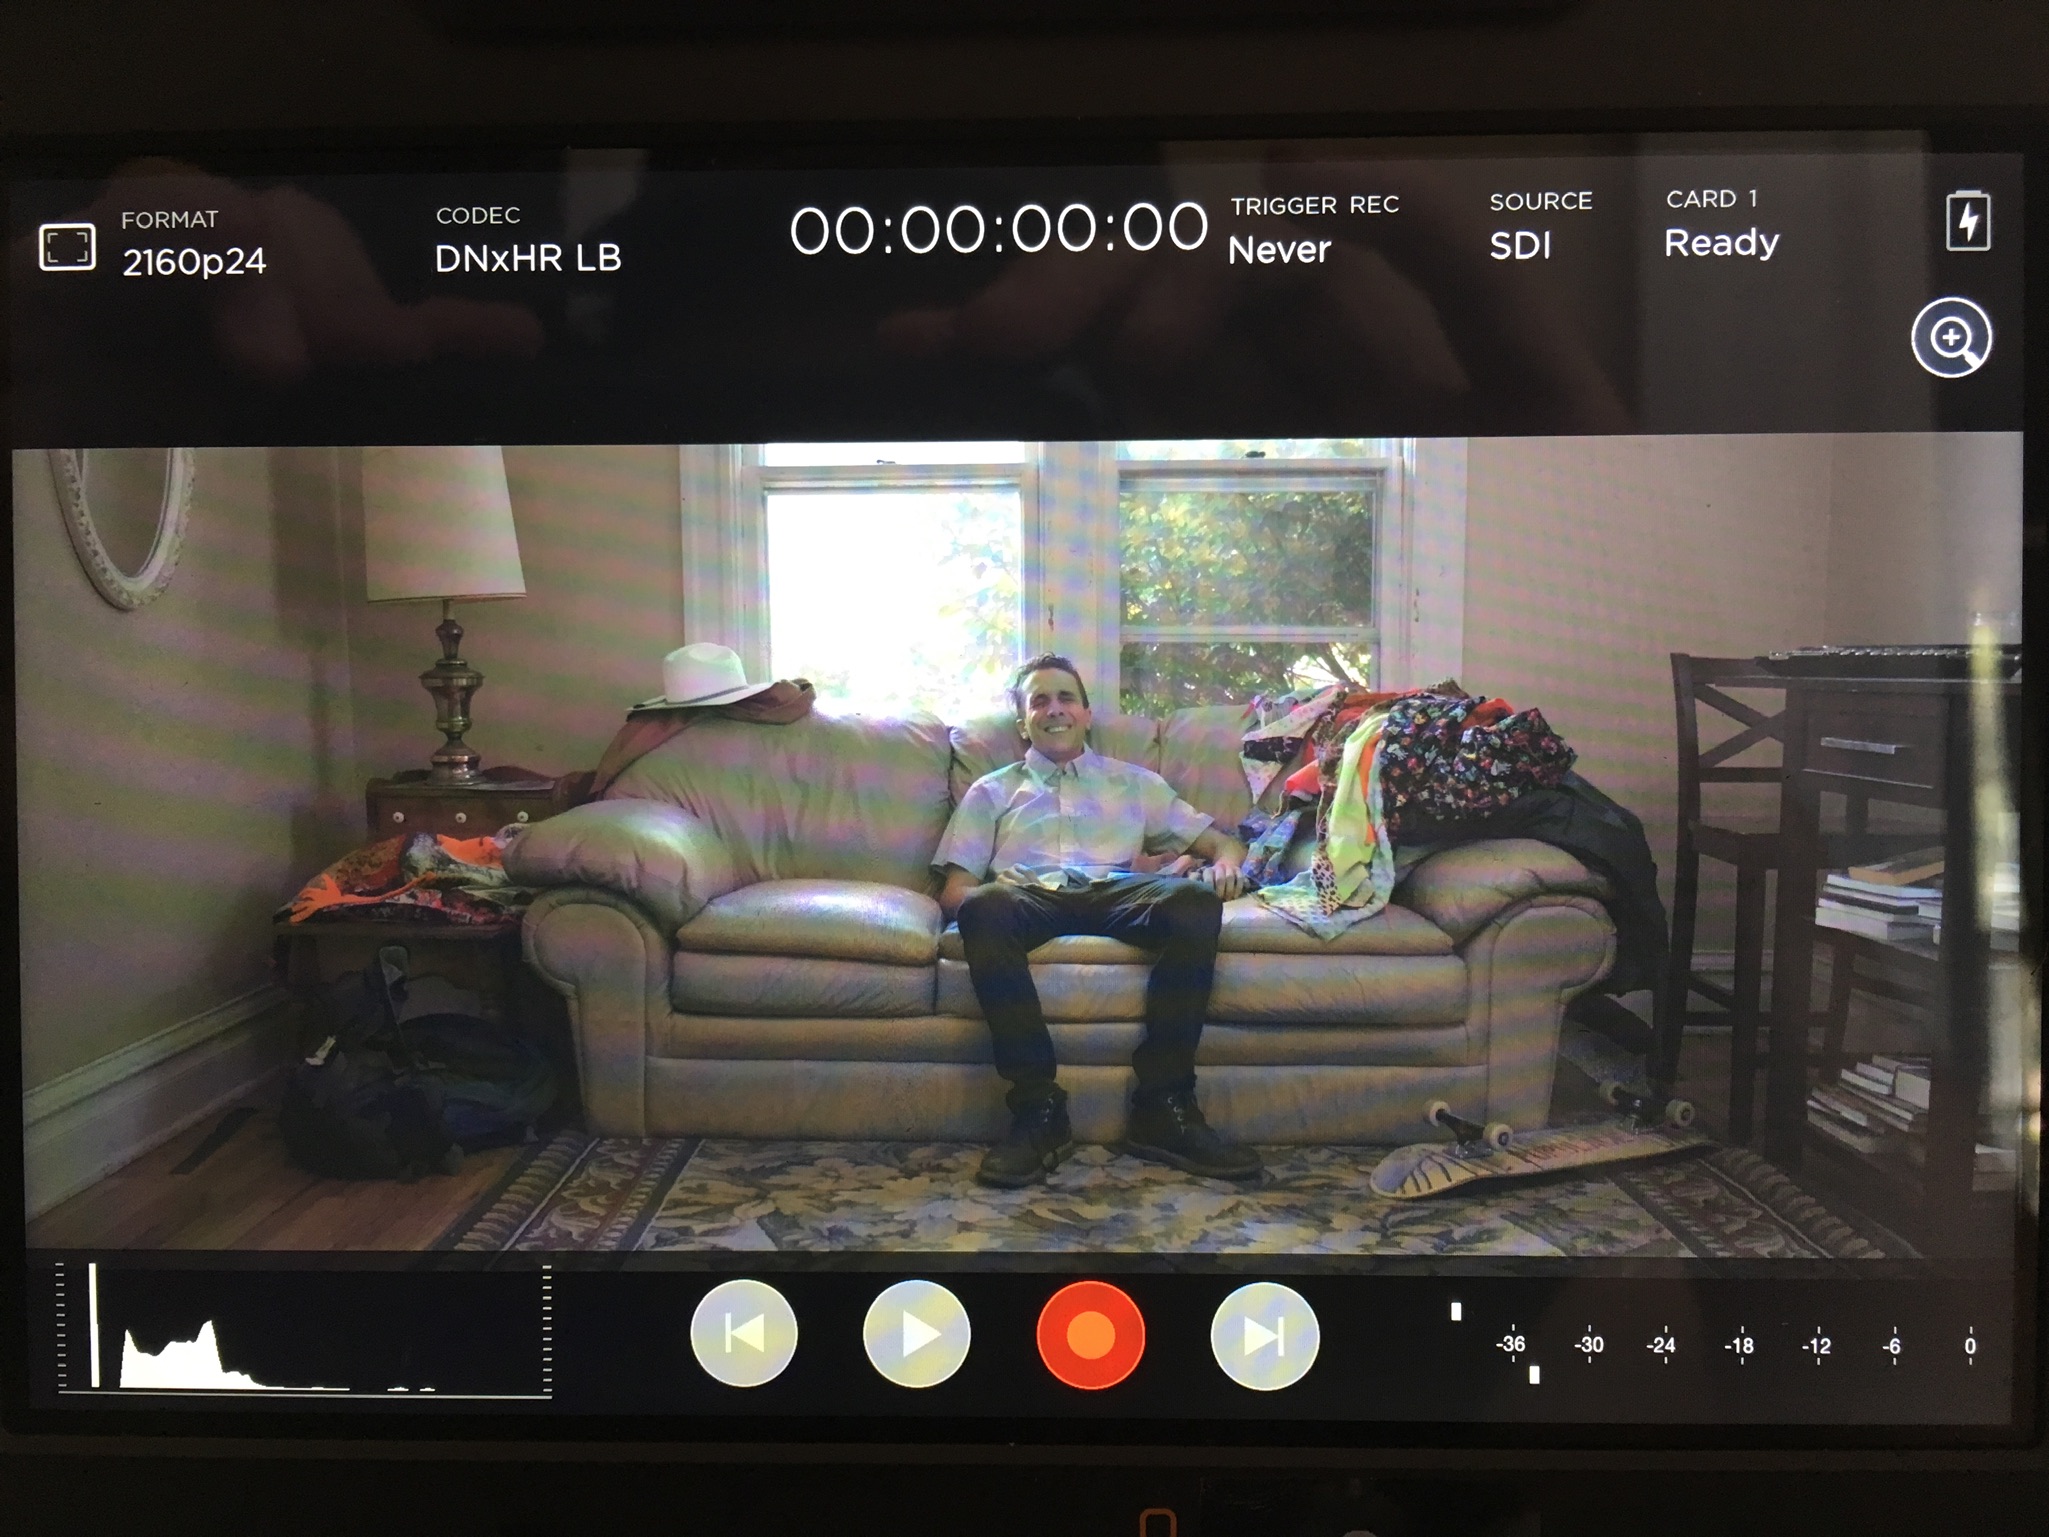 Camera monitor showing person sitting on couch.